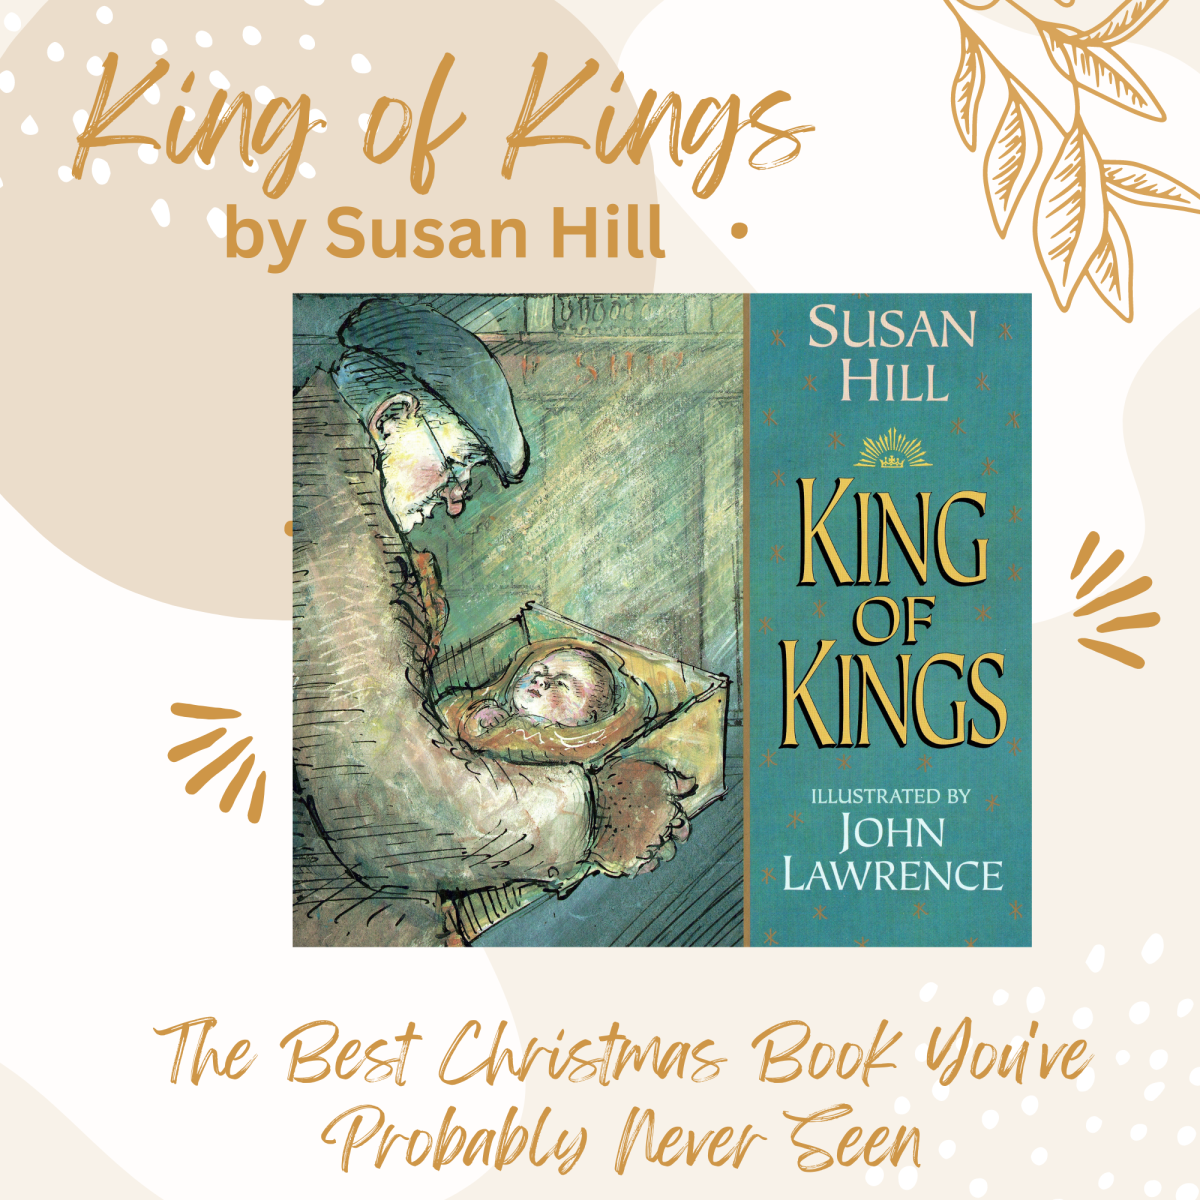 King of Kings by Susan Hill: The Best Christmas Book You've Probably Never Seen